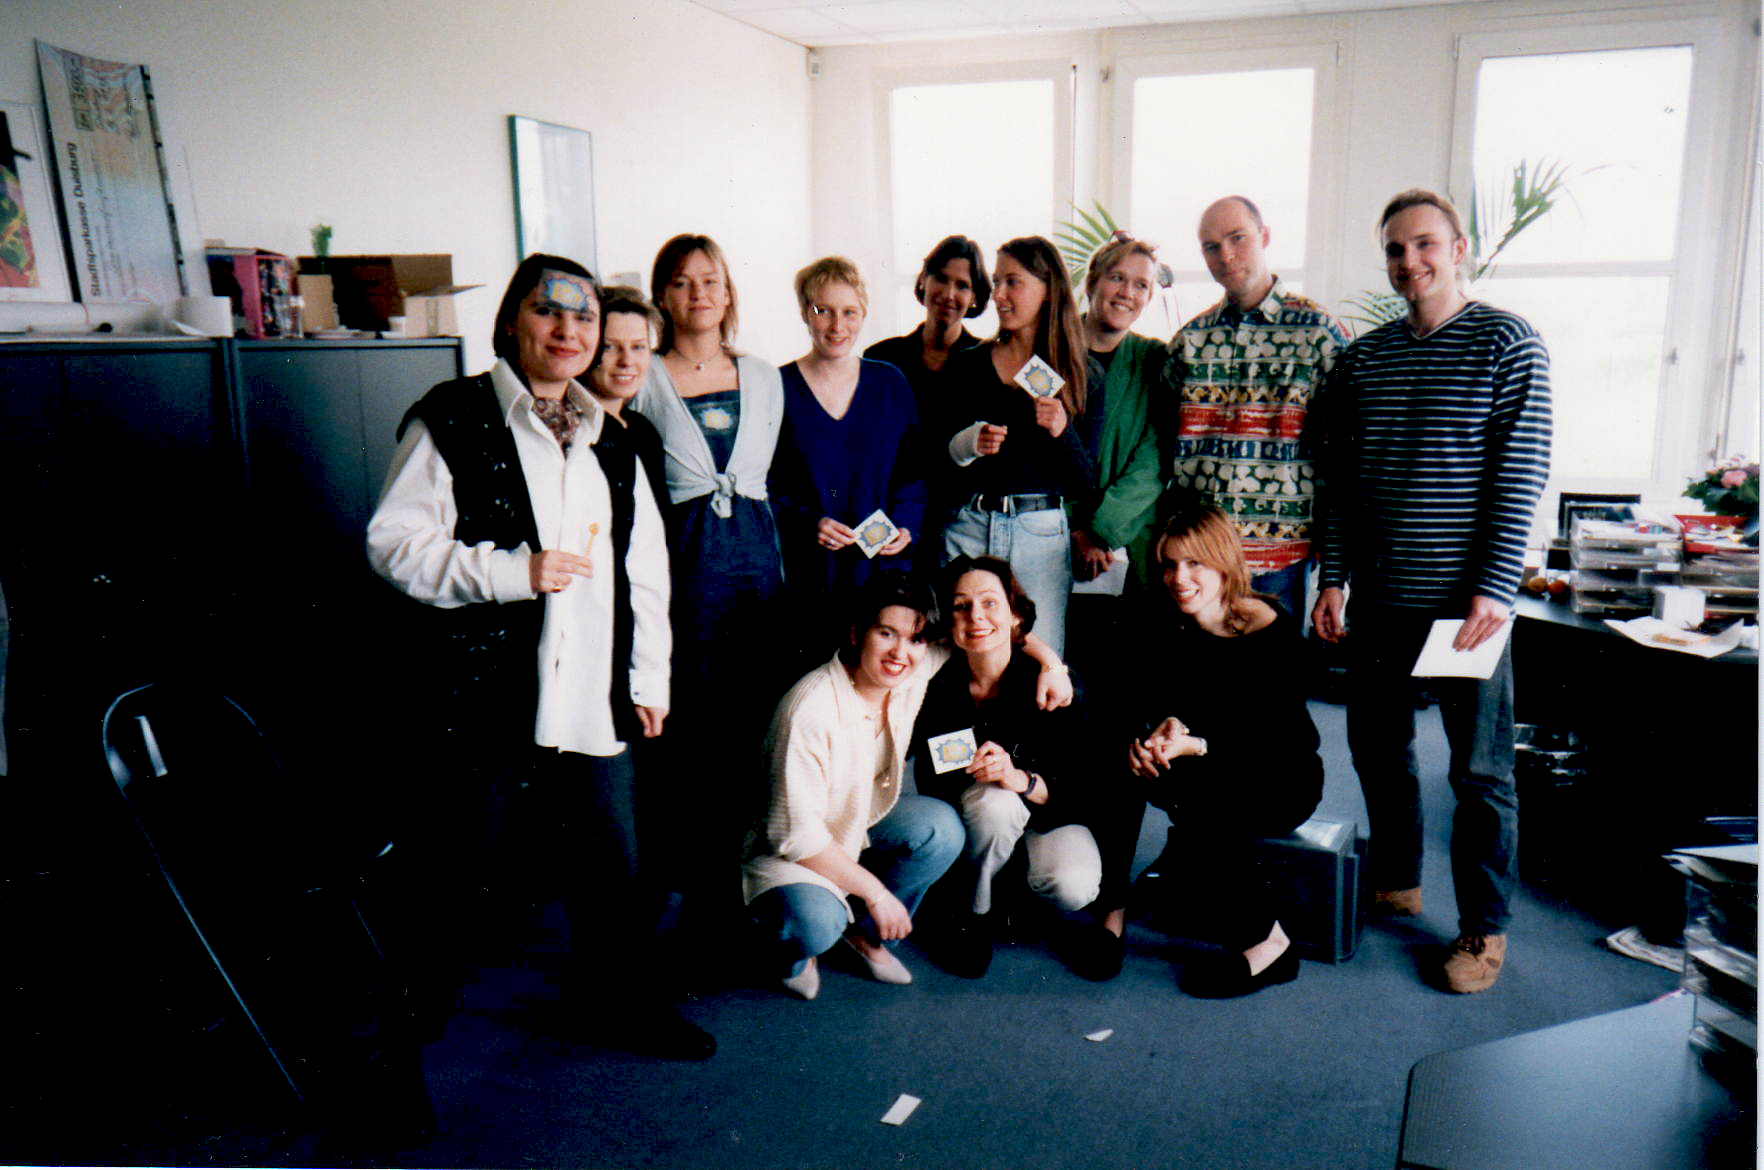 Farnaz Samiinia and Co-workers at Endemol Enterainment - 1993.